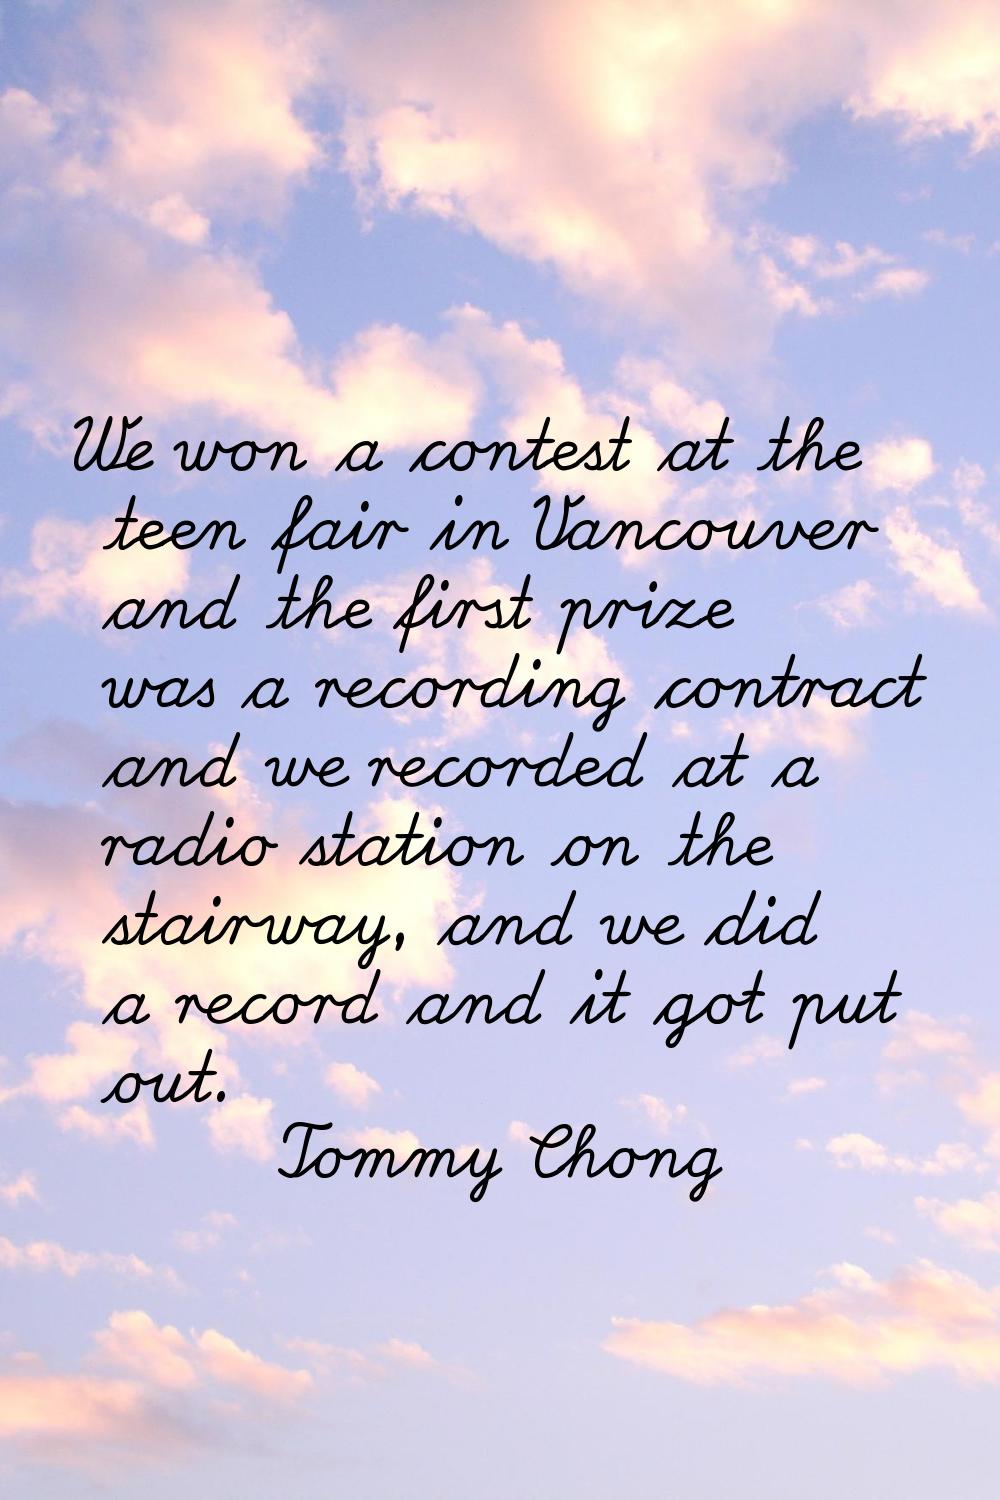 We won a contest at the teen fair in Vancouver and the first prize was a recording contract and we 